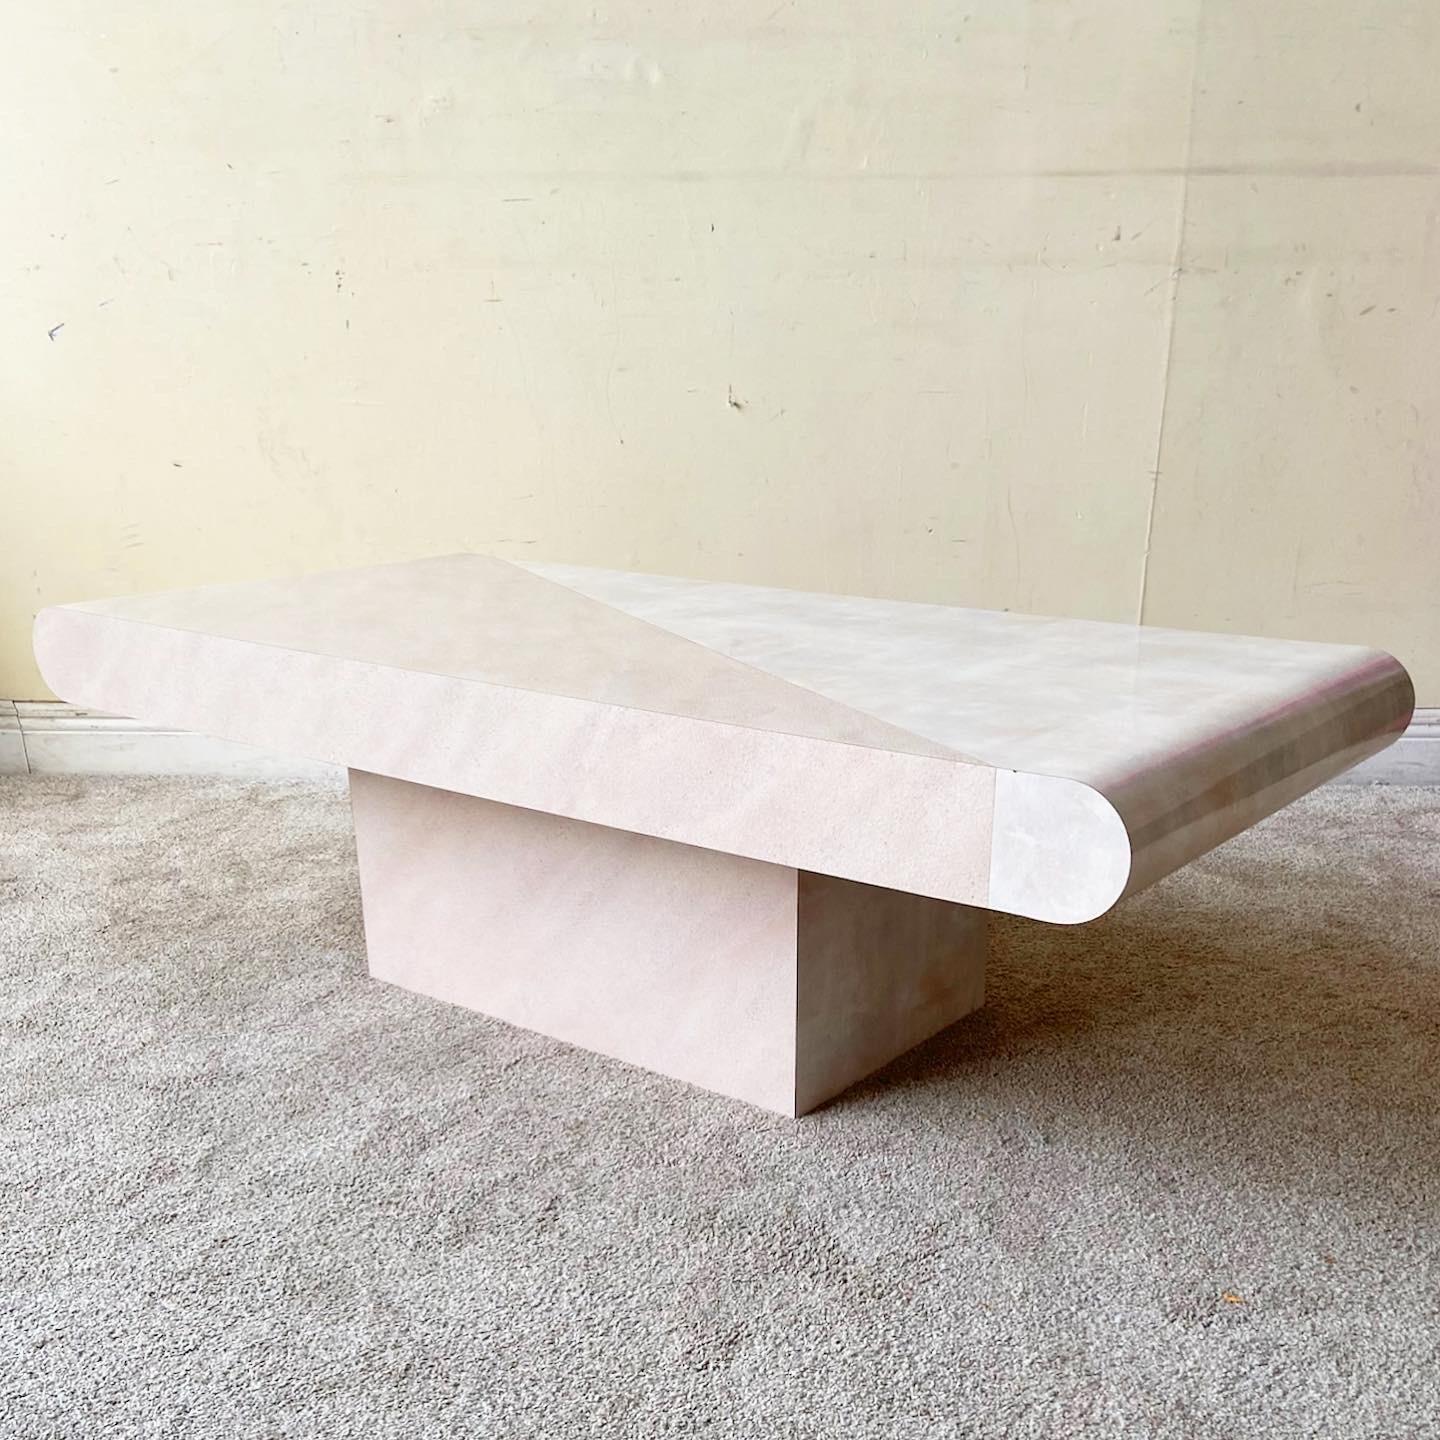 Exceptional vintage postmodern two tone bullnose, rectangular coffee table. Half of the table features a pink brushed glossy lacquer laminate with the other half displaying a rough light pink matte laminate.